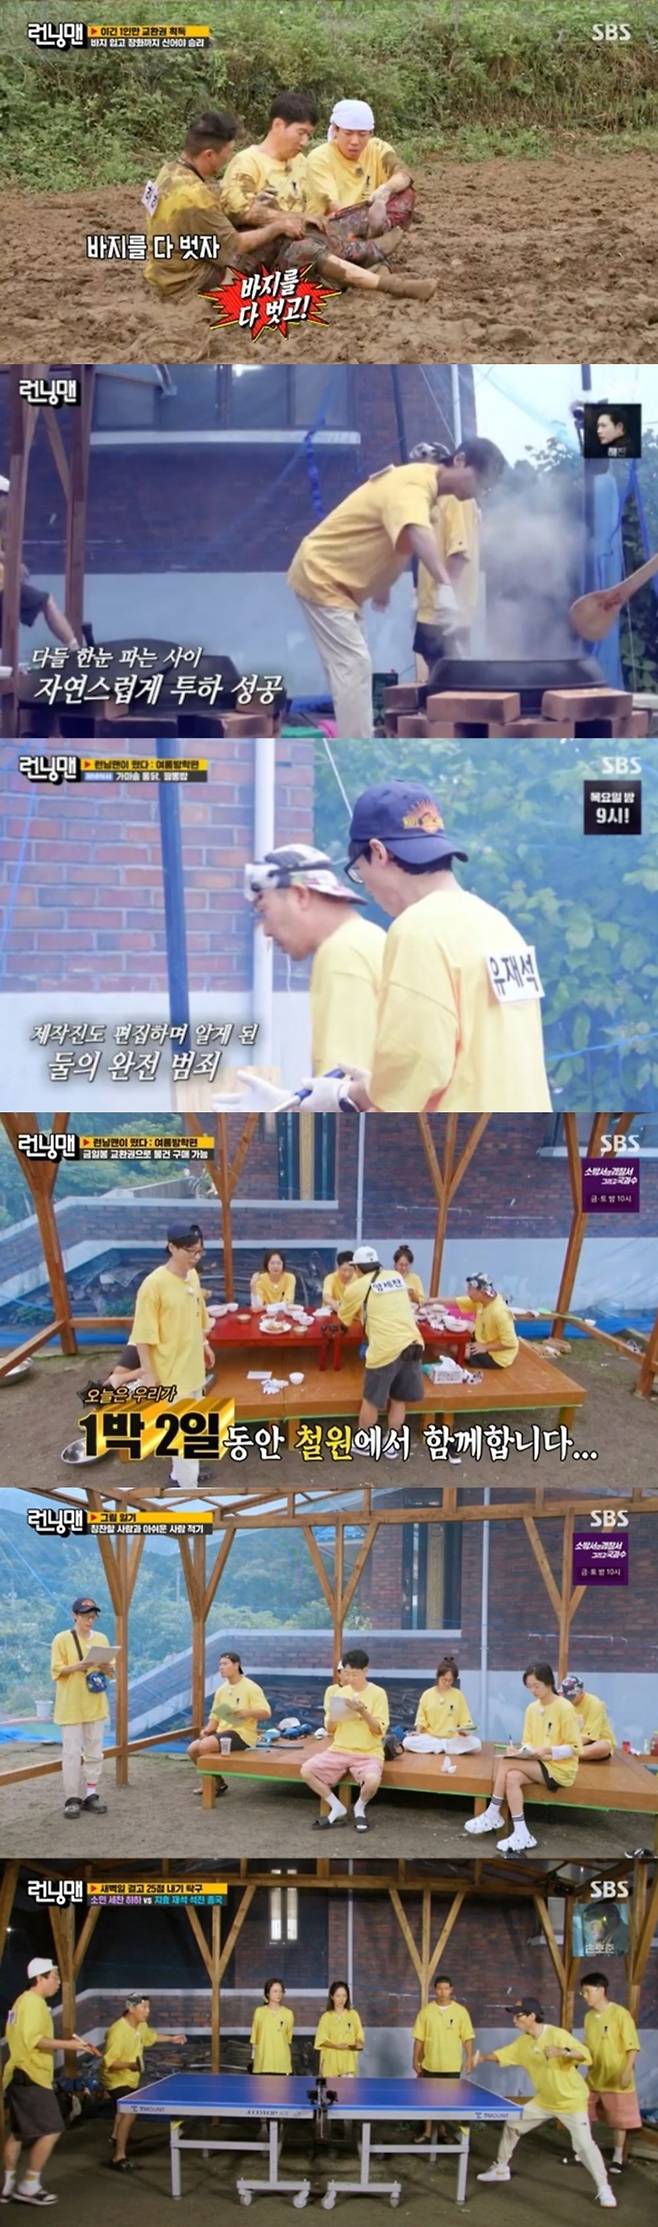 SBS Running Man is watching Summer Days with Coo Special effect.Running Man, which aired on the 6th, saw its target index of 2049 viewership rise sharply from last week to 2.8%, which is the No. 1 entertainment show in the same time zone, and the highest viewership per minute also soared to 6.2 percent (based on Nielsen Koreas metropolitan area and households).The broadcast was decorated with Summer Days with Coo last week, giving a more intense smile.Yoo Jae-Suk, Kim Jong-kook and Song Ji-hyo got the right of exchange side by side in the mud fight with the right of exchange, and the production team gave the loser Ji Suk-jin, Yang Se-chan and Haha three chances to resurrect the loser.Yang Se-chan won the right of exchange, and the younger of the three won the right of exchange.Yang Se-chan, who had a chicken house career, challenged the cauldron chicken, and Yoo Jae-suk declared, I will not put magic soup.Yoo Jae-Suk, who had a hard time catching the flavor of jjamppong soup, secretly dropped a lot of reddish with the help of Yang Se-chan, but this part turned out to be something he did not know at the production Jindo site.The members, who did not know anything, were satisfied with the taste, saying, It is amazingly perfect. It is like the 5th Champon in Paju. On the other hand, the cauldron chicken was applauded by everyone for its perfect visual and taste.Yoo Jae-Suk and Yang Se-chan, who received the most praise in the picture diary time with another right of exchange, added the right of exchange.In addition, the members went on a ping-pong bet on dawn day. The game was fiercer than expected, and this scene took the best minute with the highest audience rating of 6.2% per minute.As a result of the final confrontation, dawn day was won by Yoo Jae-Suk, Ji Suk-jin, Song Ji-hyo and Kim Jong-kook.